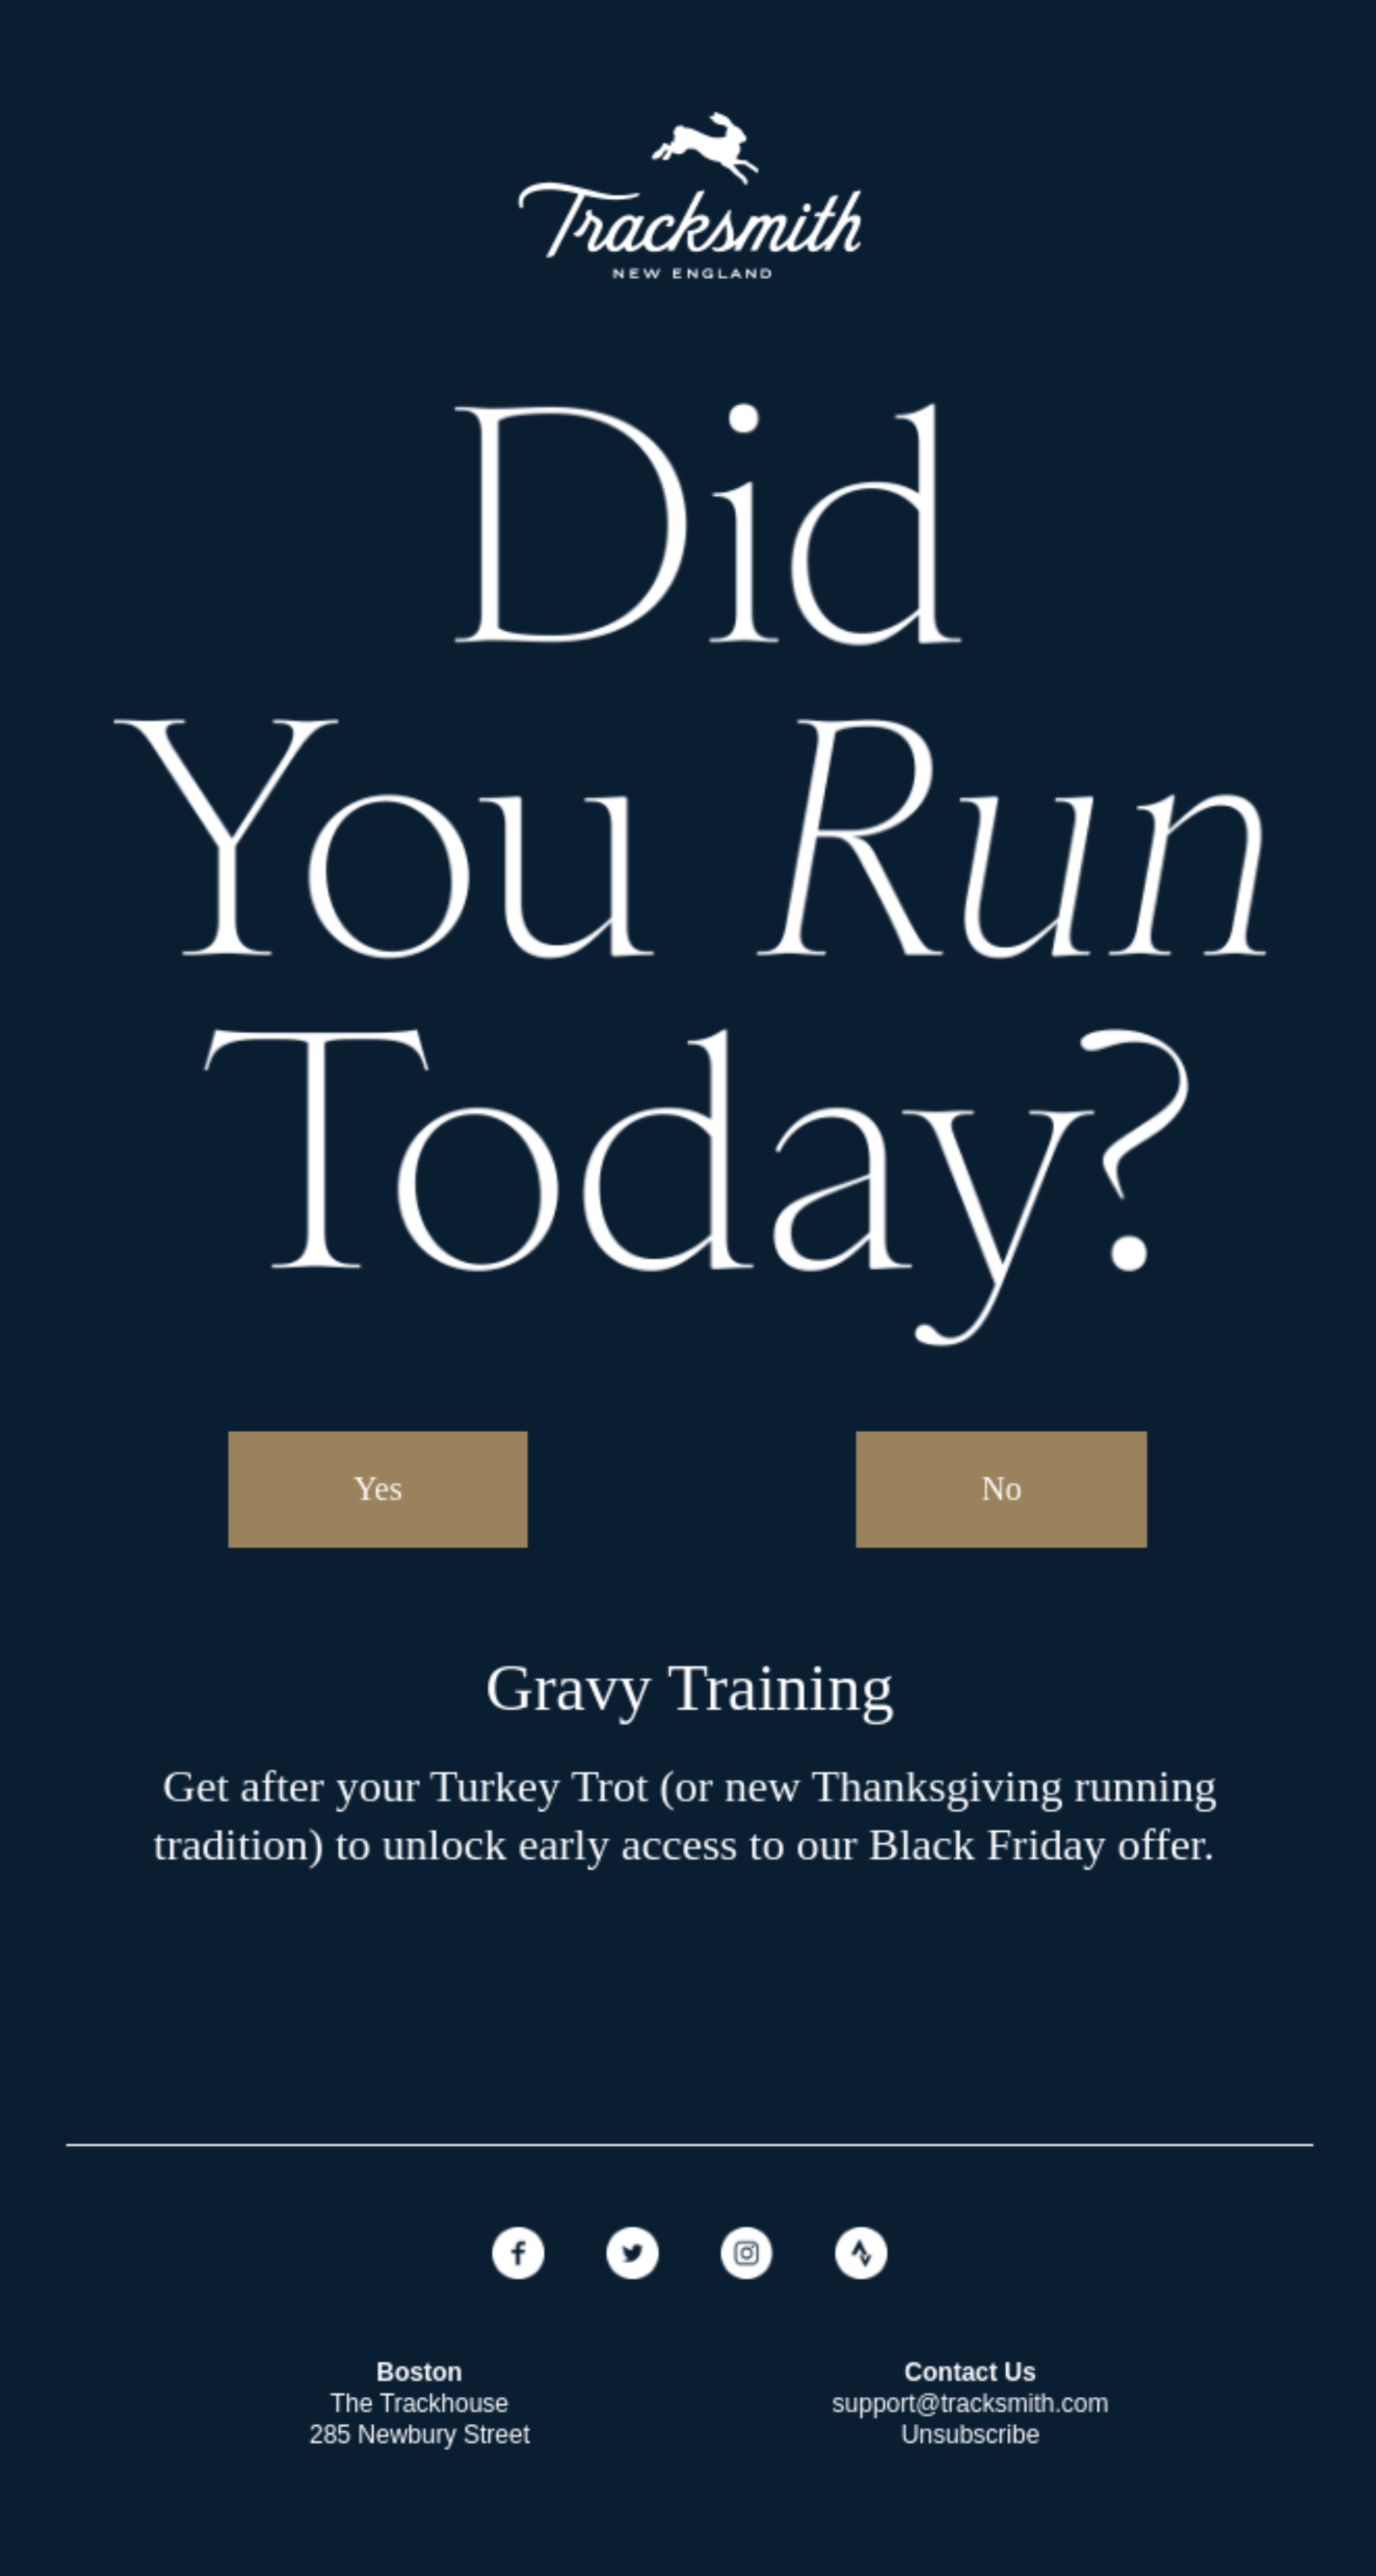 Email from Tracksmith asking users if they ran today with a short Yes or No selection